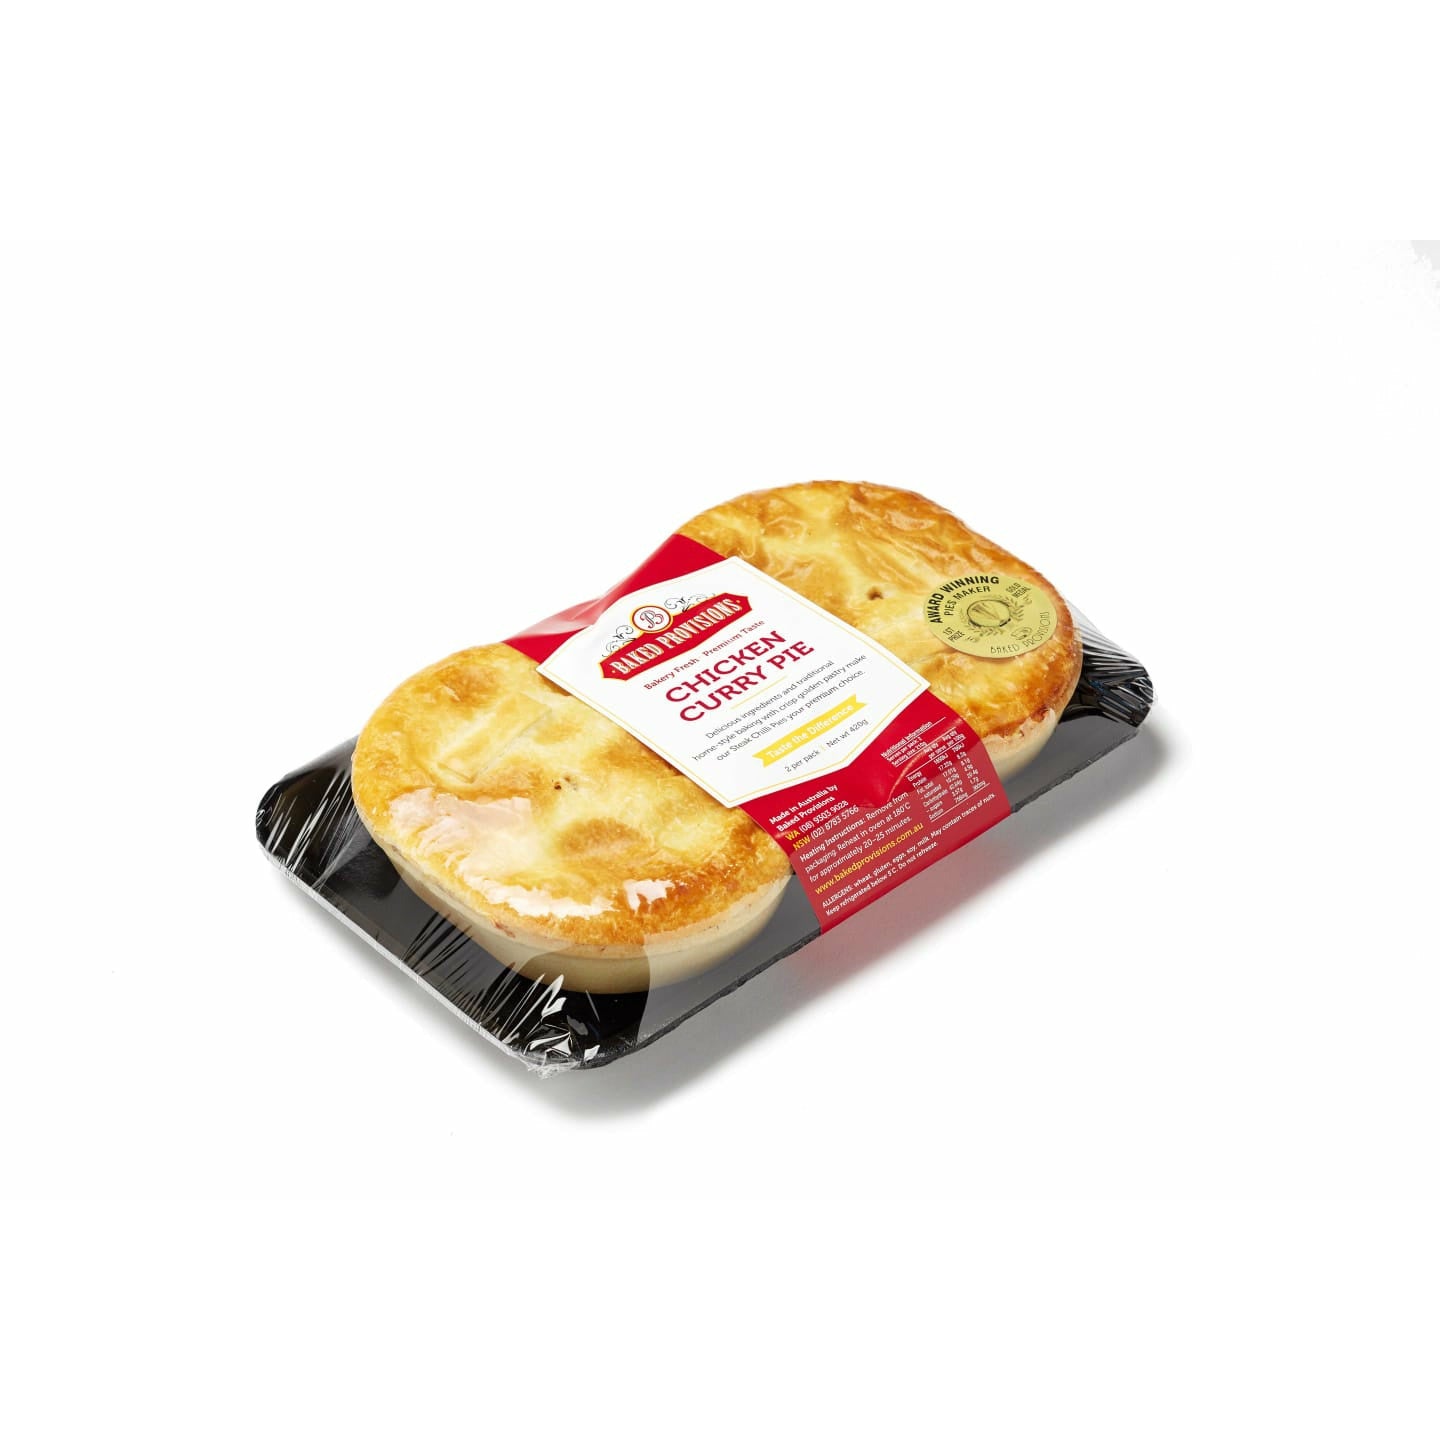 Baked Provisions Chicken Curry Pie 2pk 420g